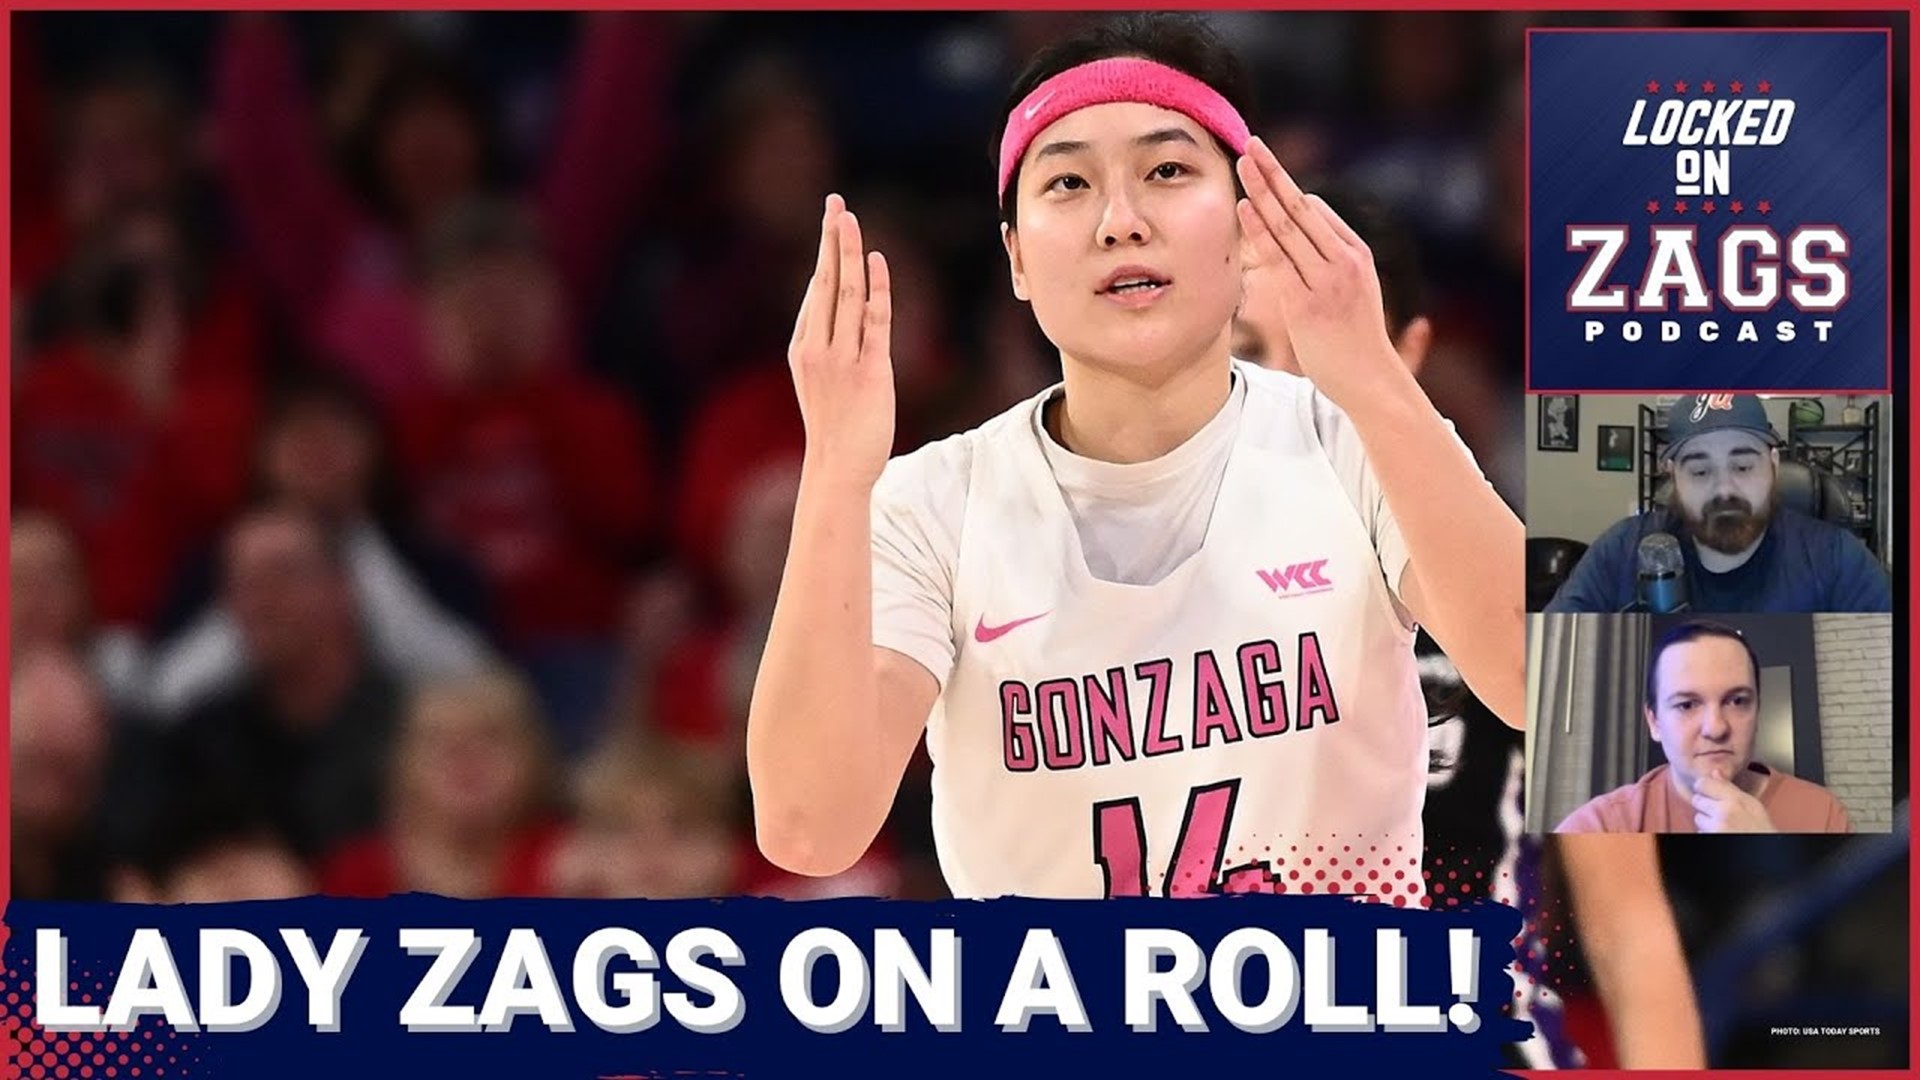 Lisa Fortier and Gonzaga's women's team nearly went undefeated in WCC play and finished the regular season 27-3, yet they are getting projected as an eight seed?